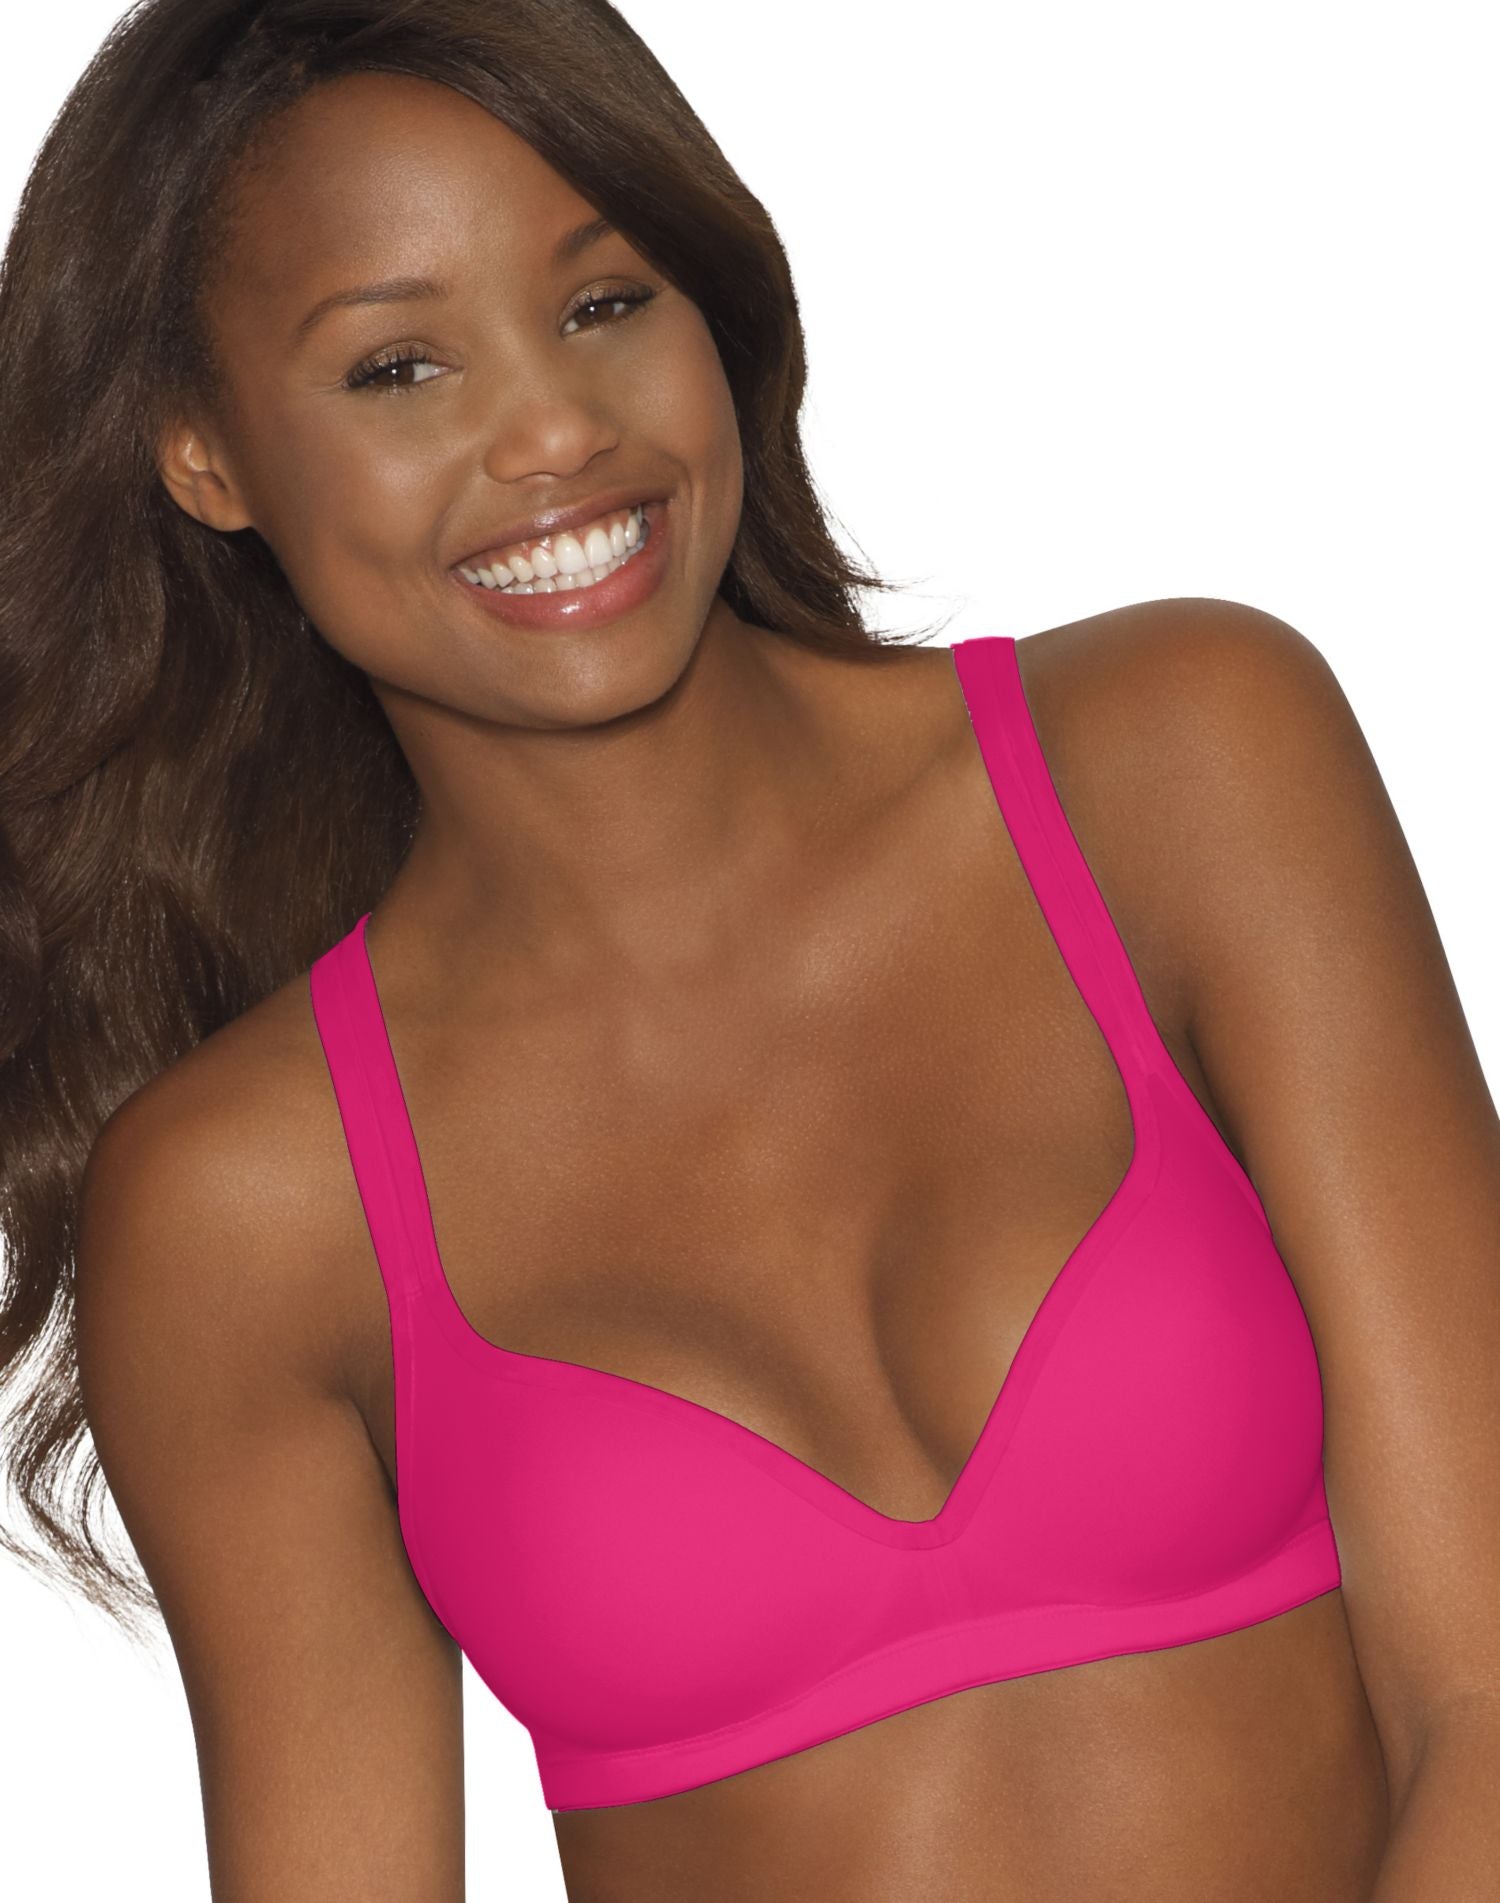 Soft-cup Push-up Bralette - Neon pink - Ladies